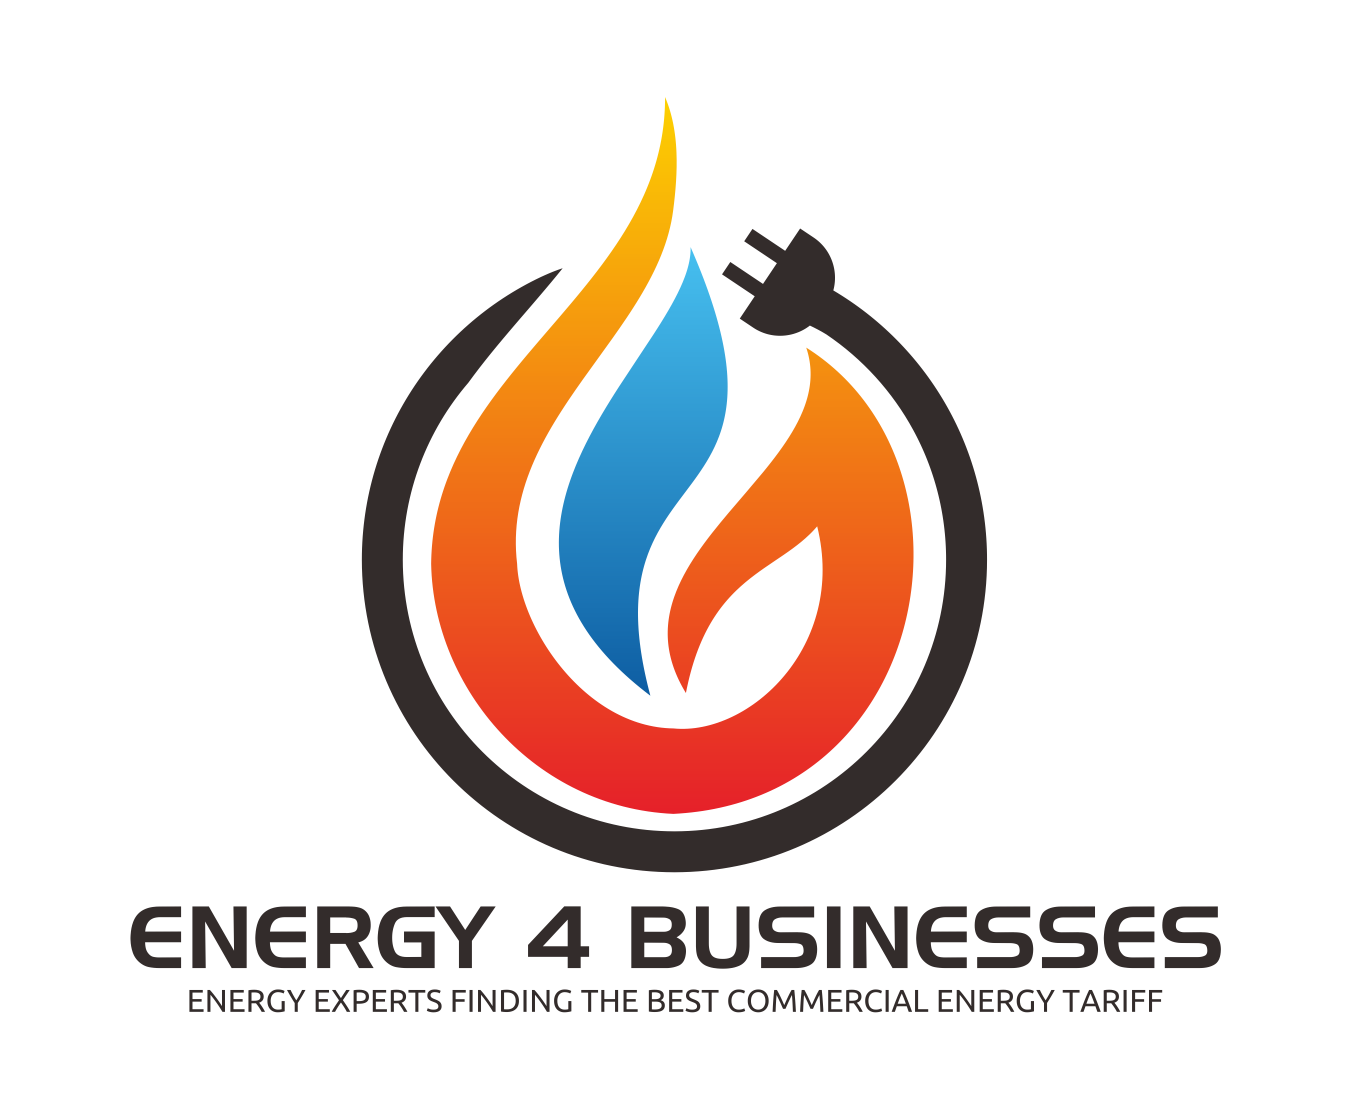 Energy 4 Businesses